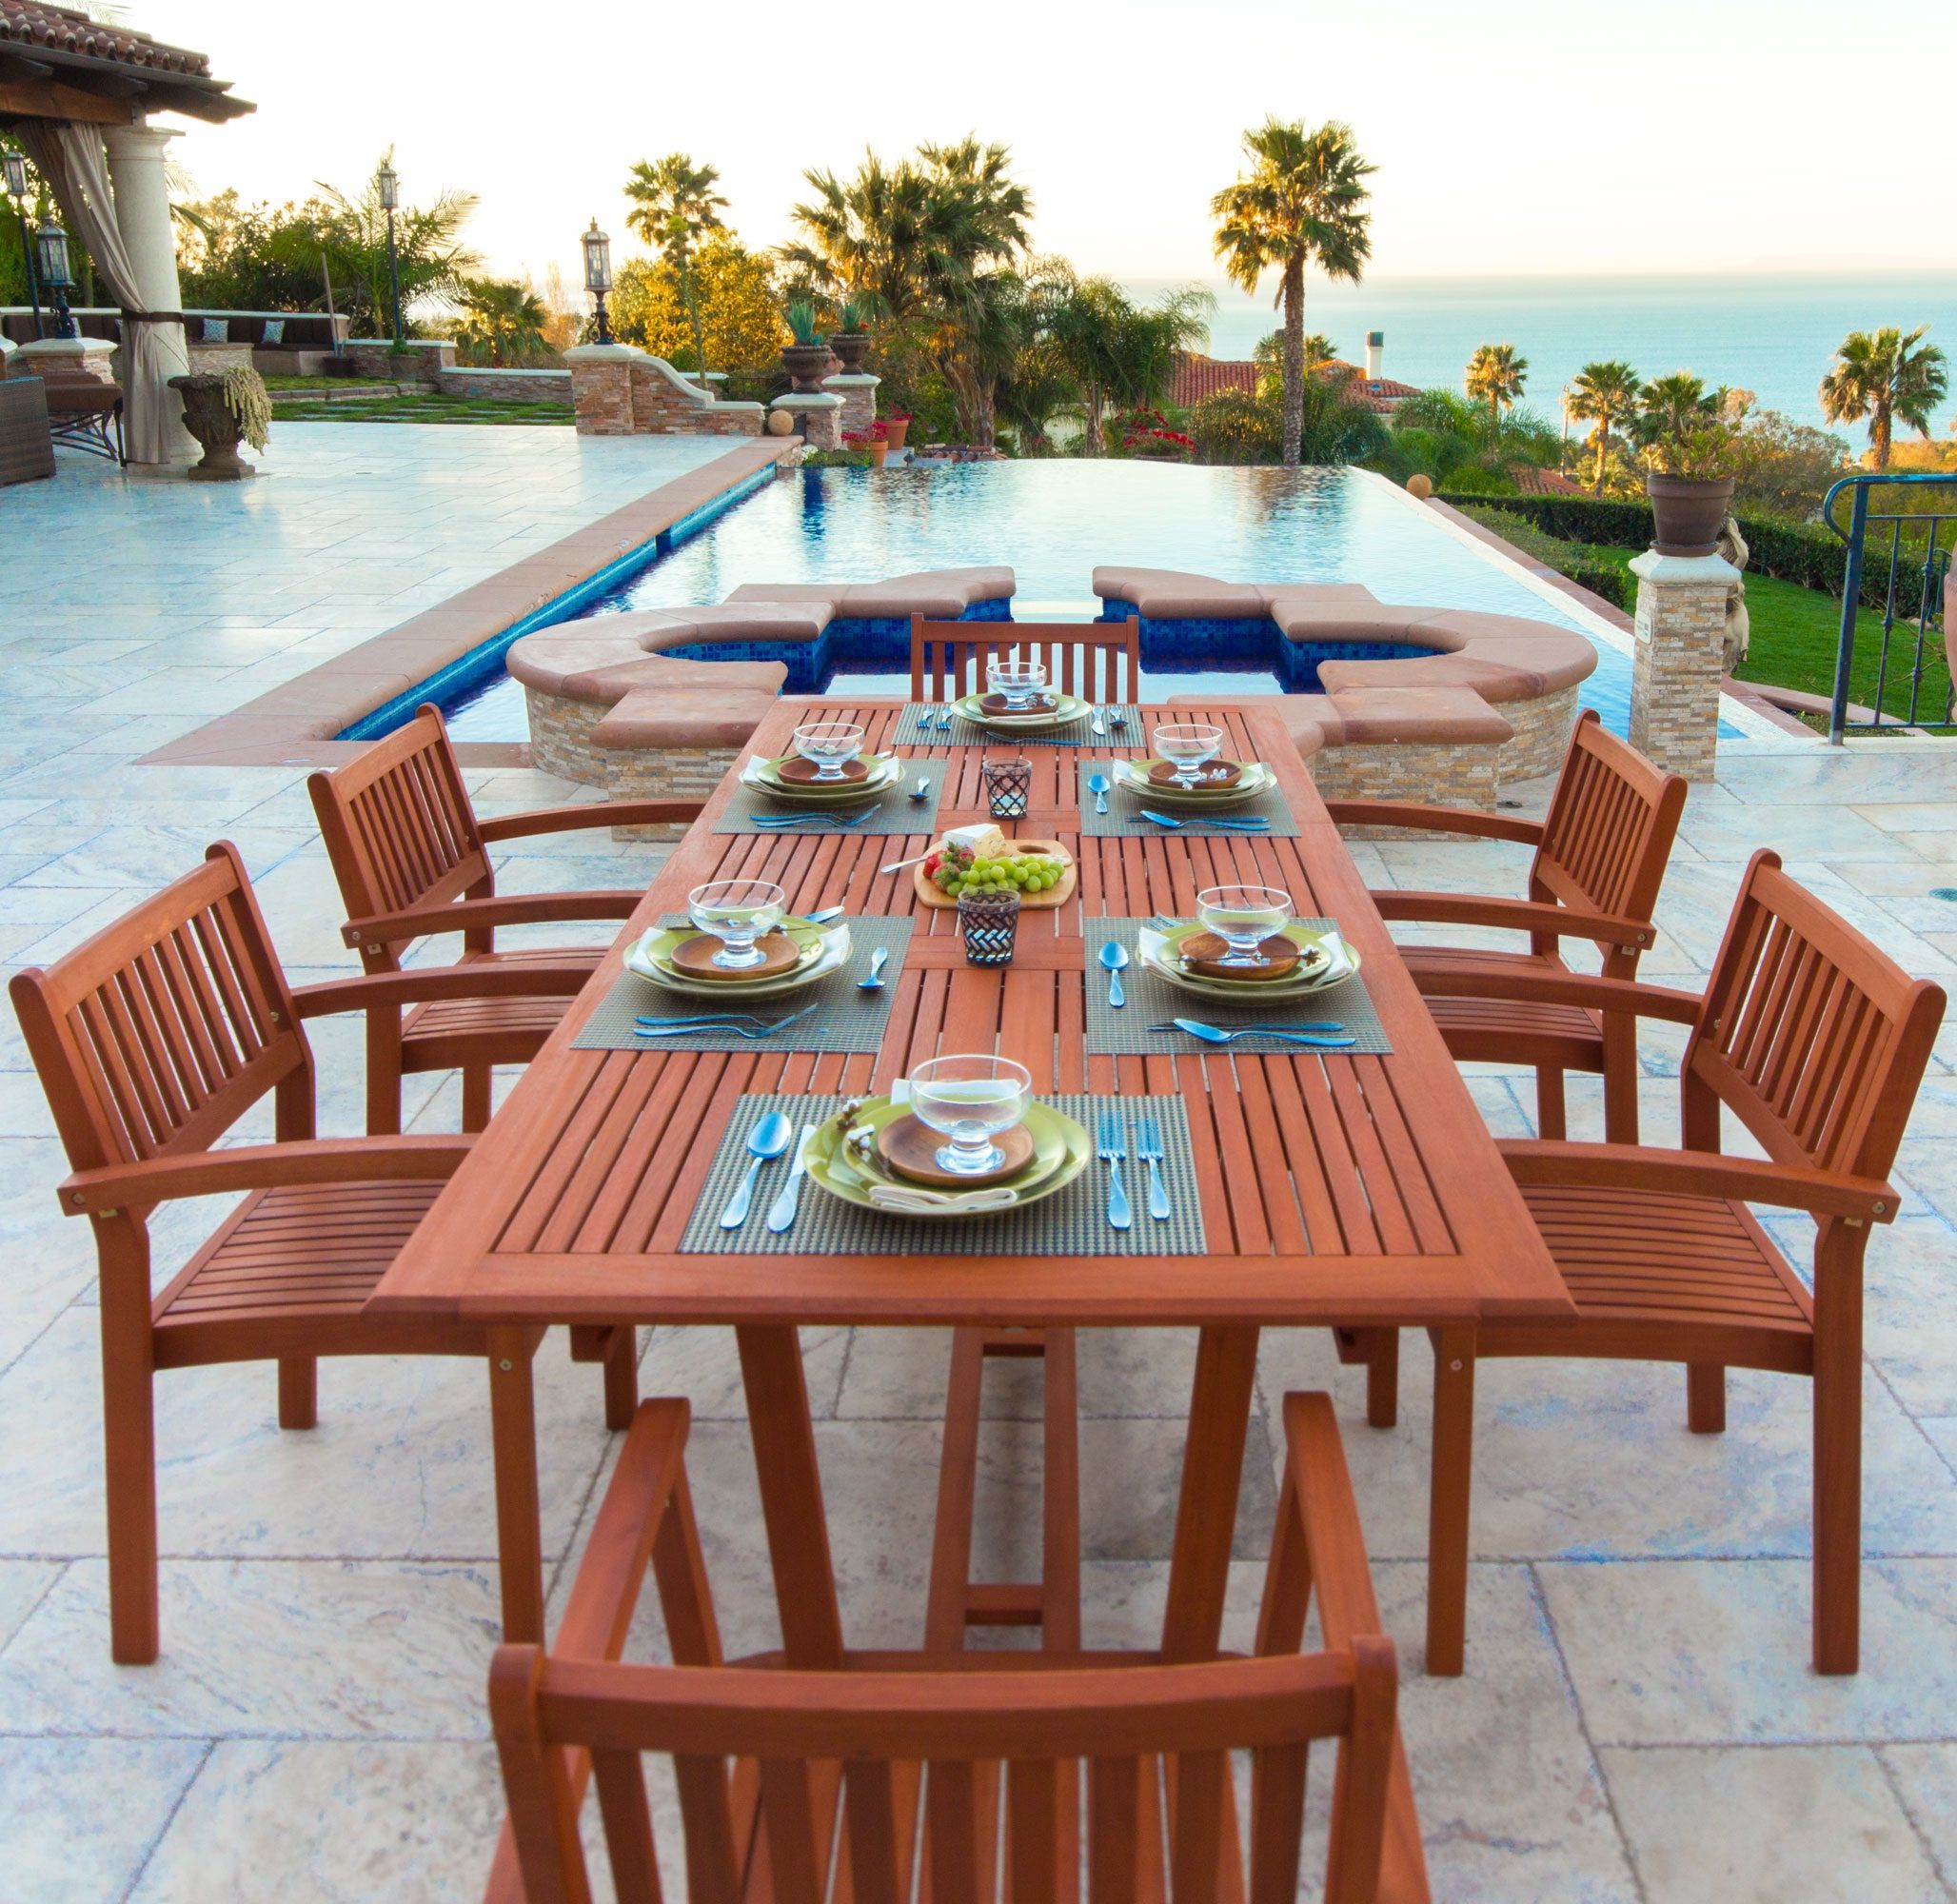 Fashionable 7 Piece Large Patio Dining Sets Regarding Vifah Malibu Outdoor 7 Piece Wood Patio Dining Set W Table & Stacking (View 1 of 15)